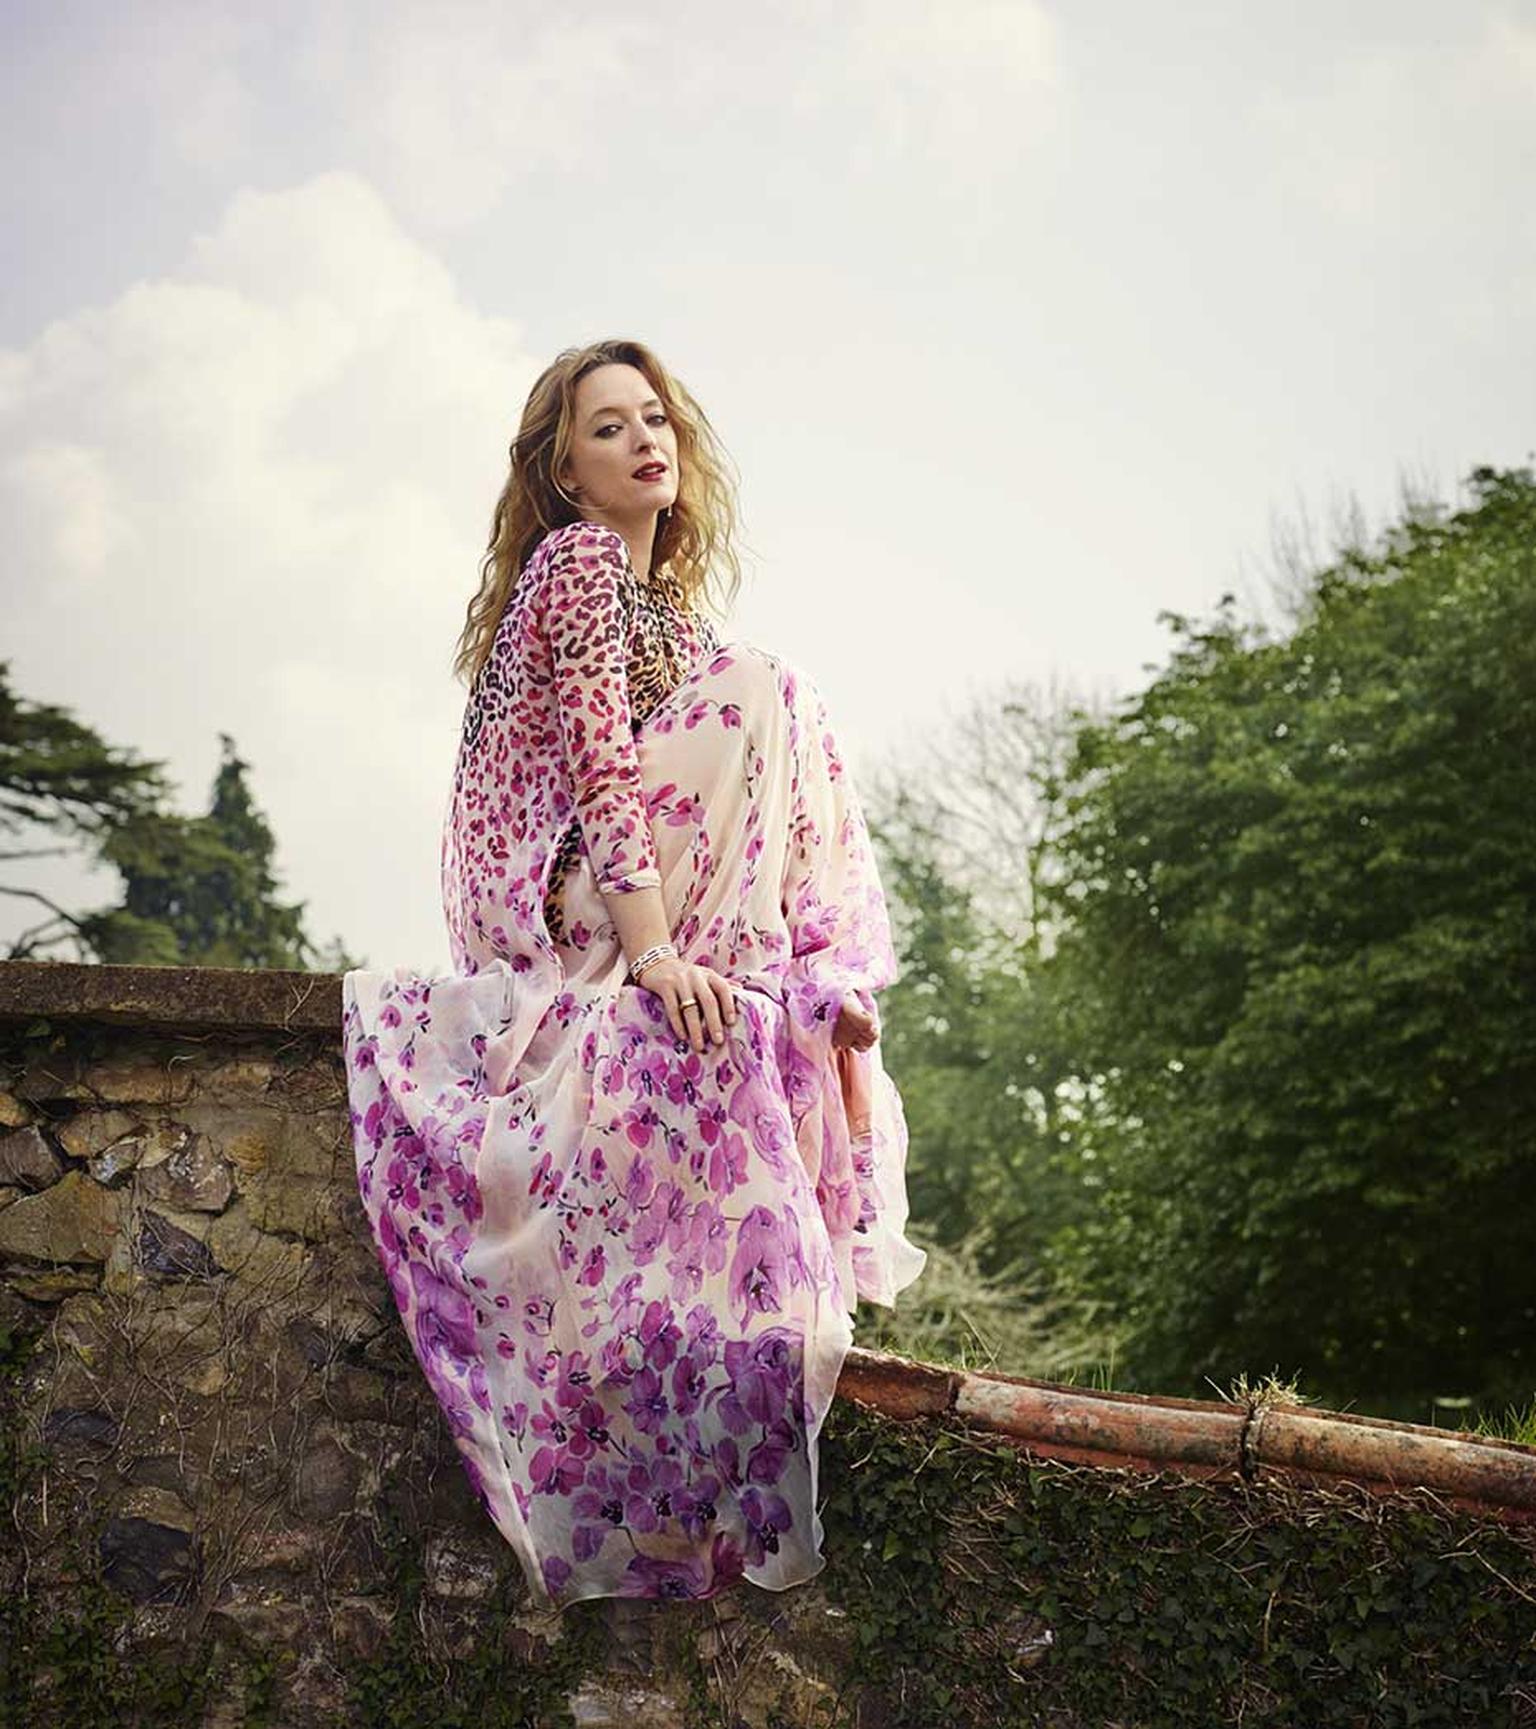 British fashion designer Alice Temperley MBE was selected by De Beers to be photographed by Mary McCartney for the diamond jeweller's Moments of Life project, which celebrates talented and inspiring women.